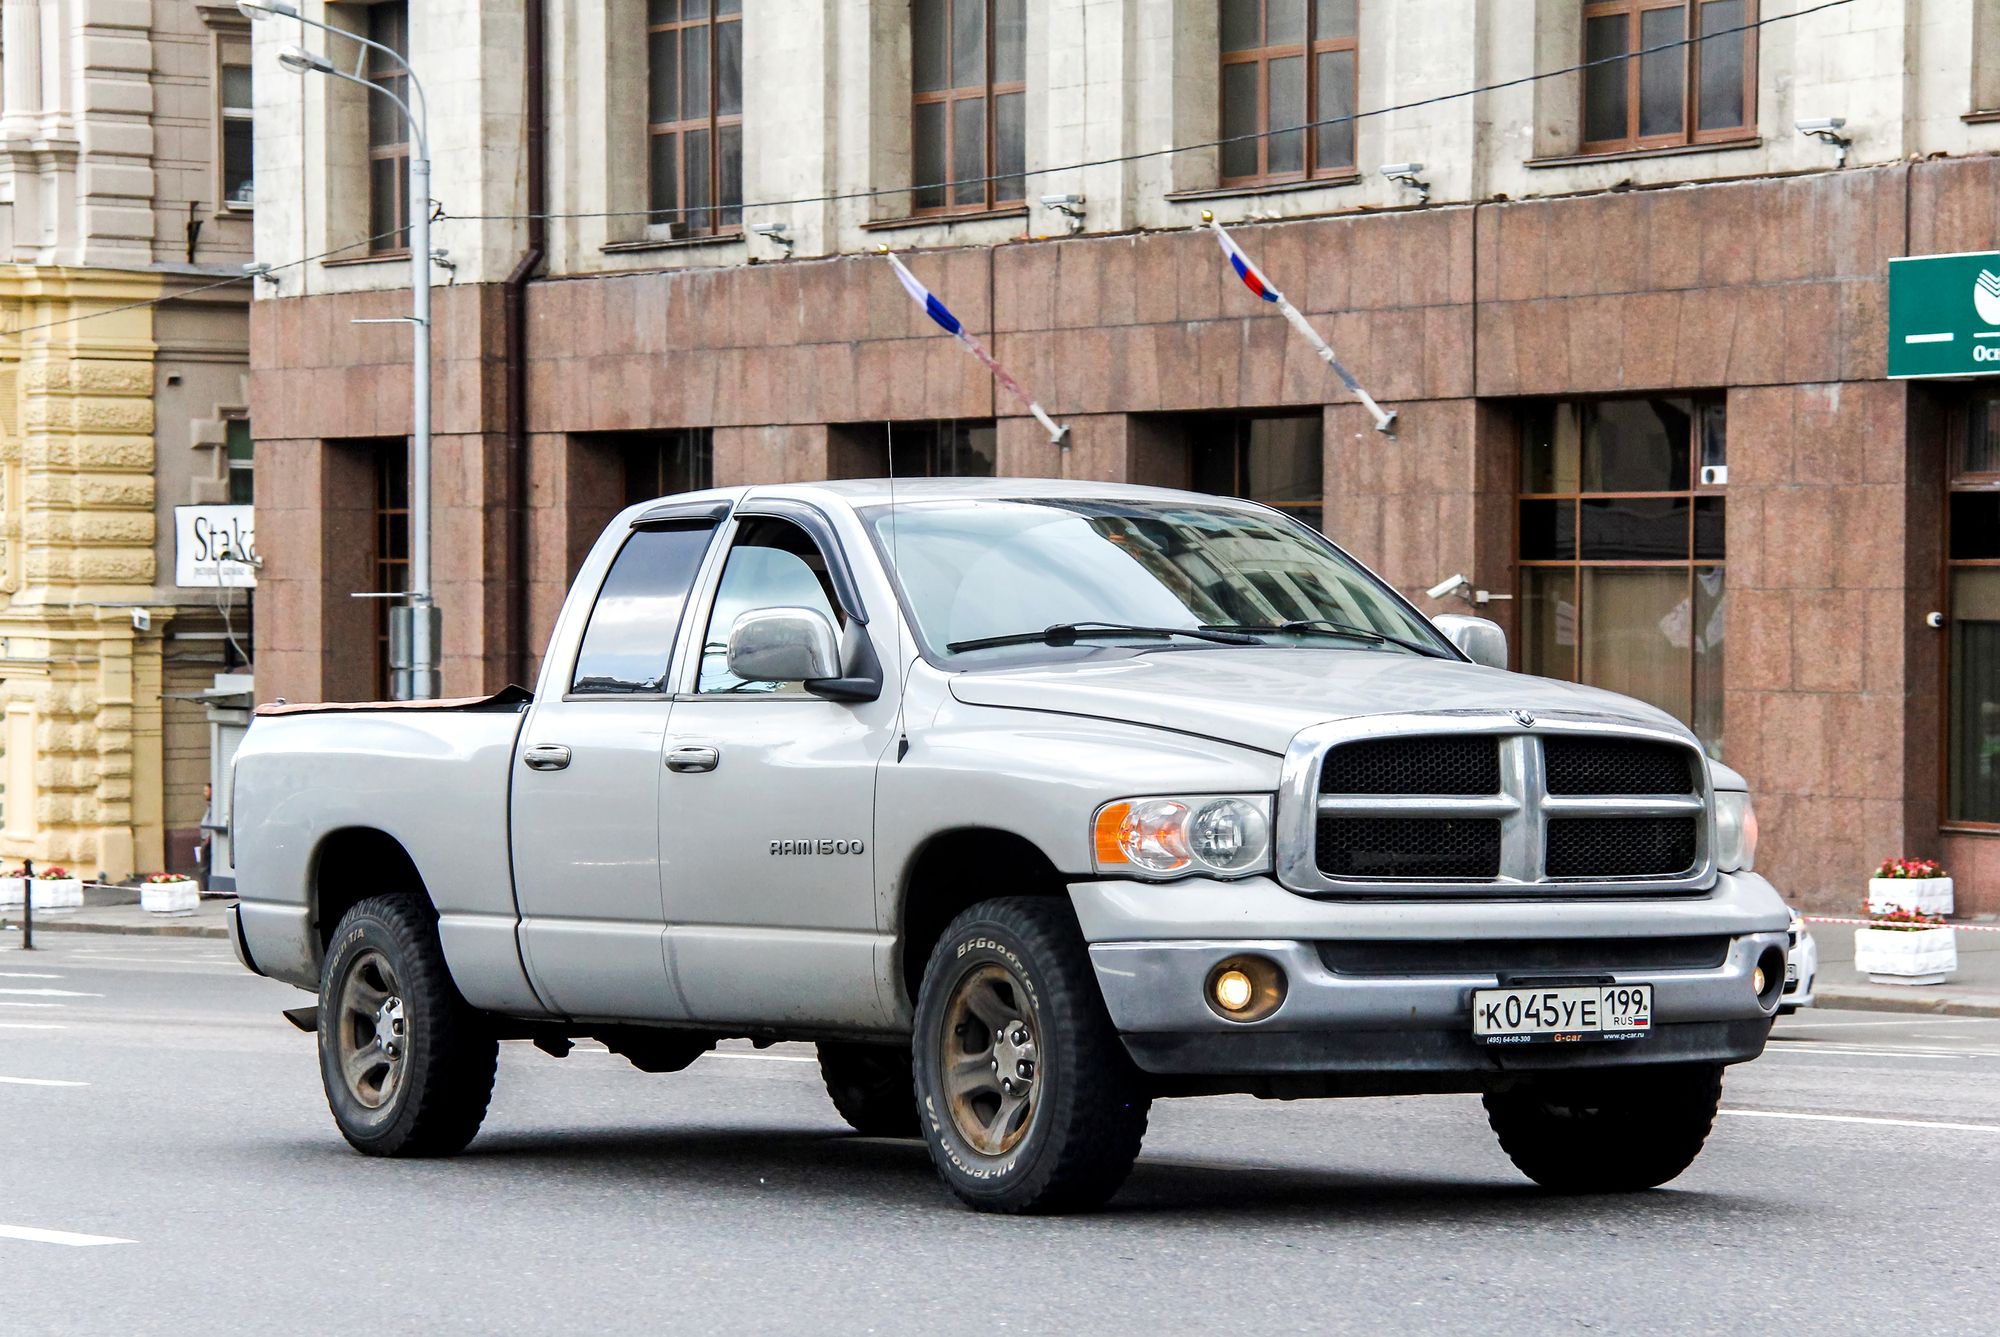 MOSCOW, RUSSIA - JUNE 2, 2013: Motor car Dodge Ram 1500 at the city street.